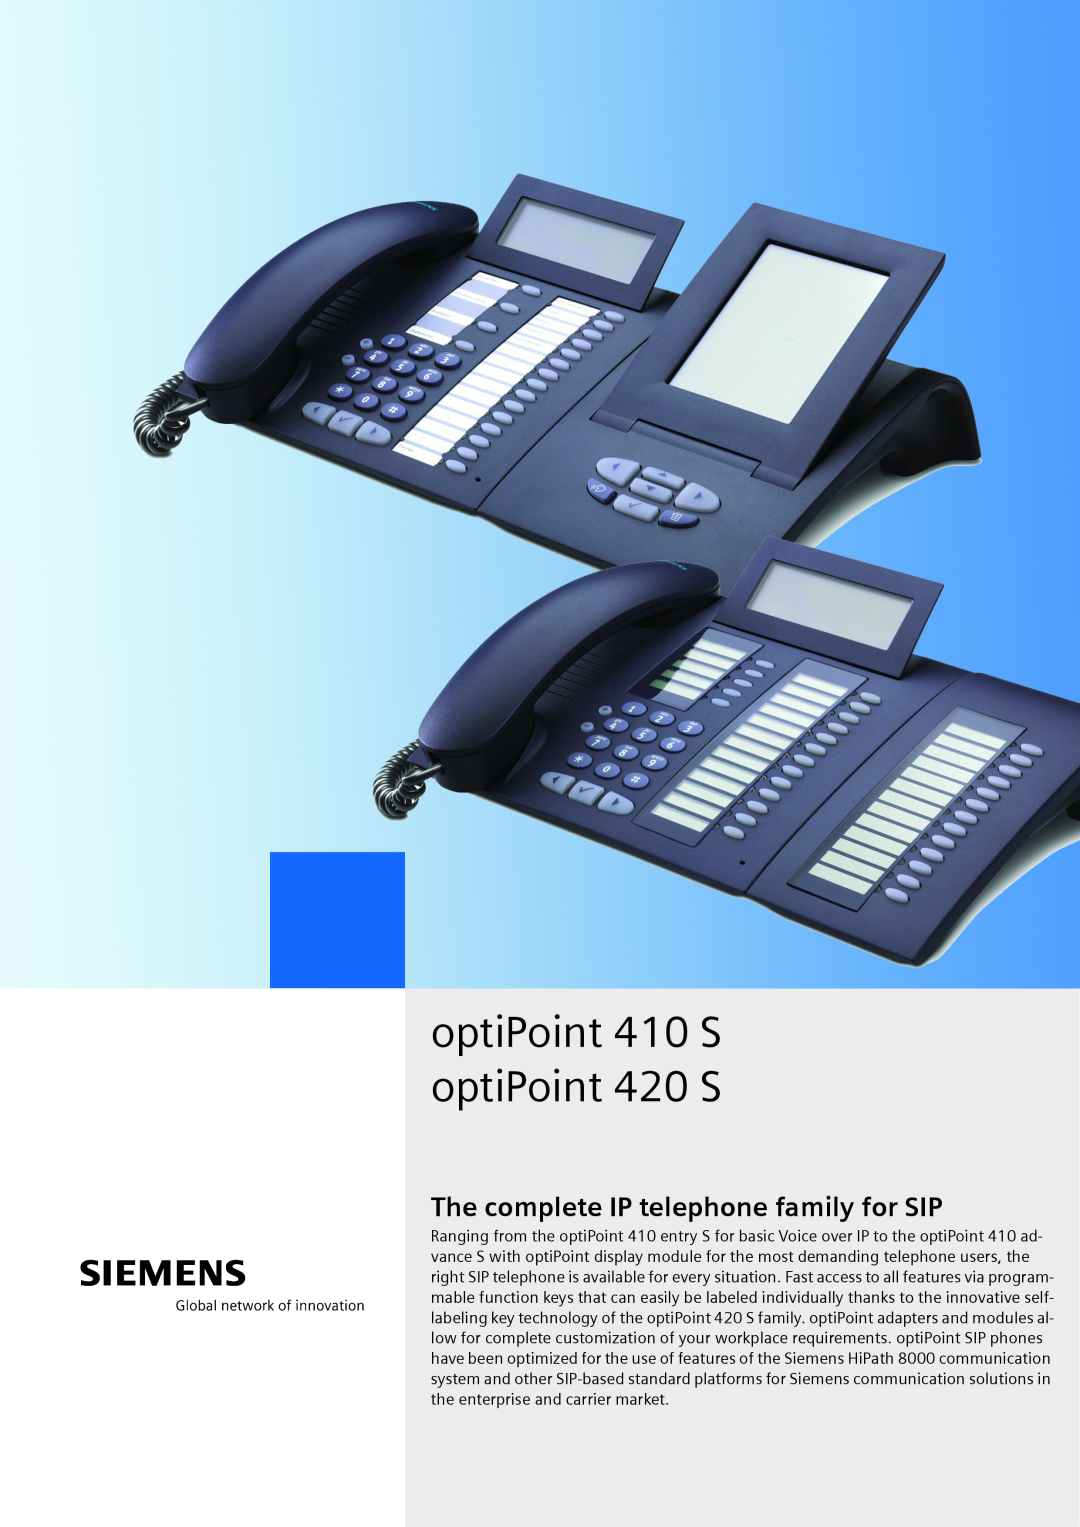 Siemens manual optiPoint 410 S optiPoint 420 S, The complete IP telephone family for SIP 